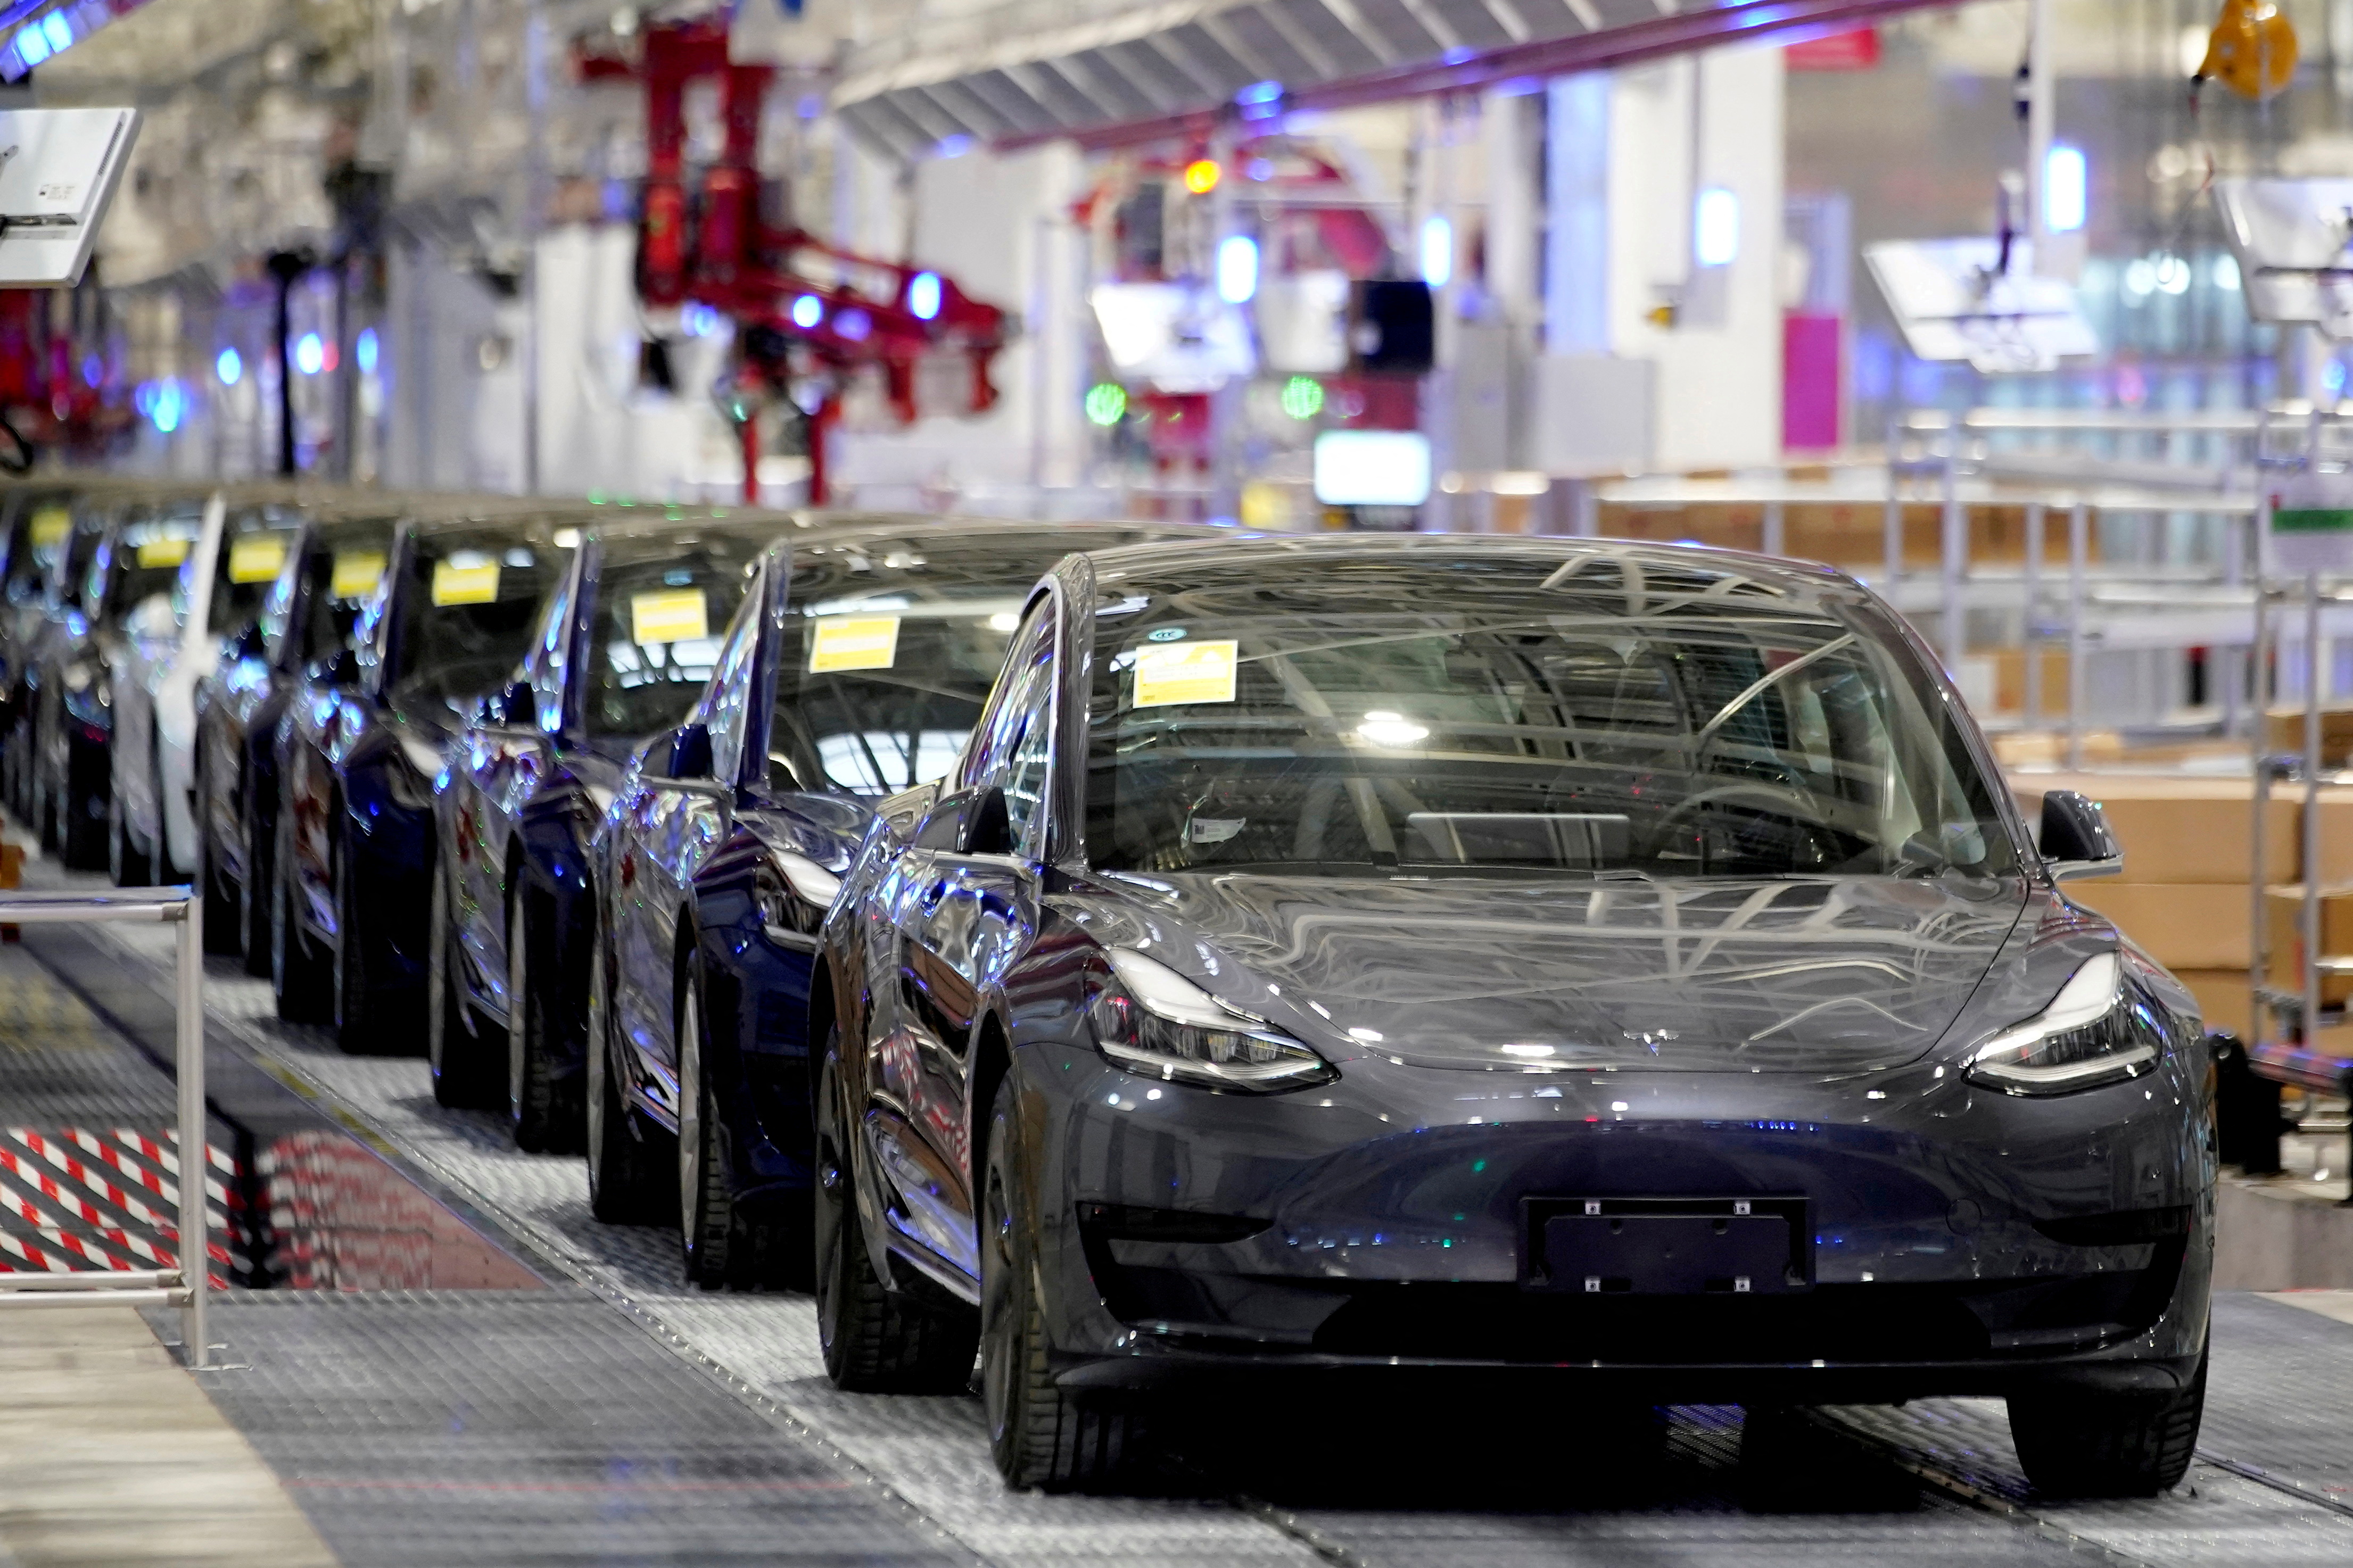 Tesla Model 3 vehicles are seen during a delivery event at the carmaker's factory in Shanghai, China